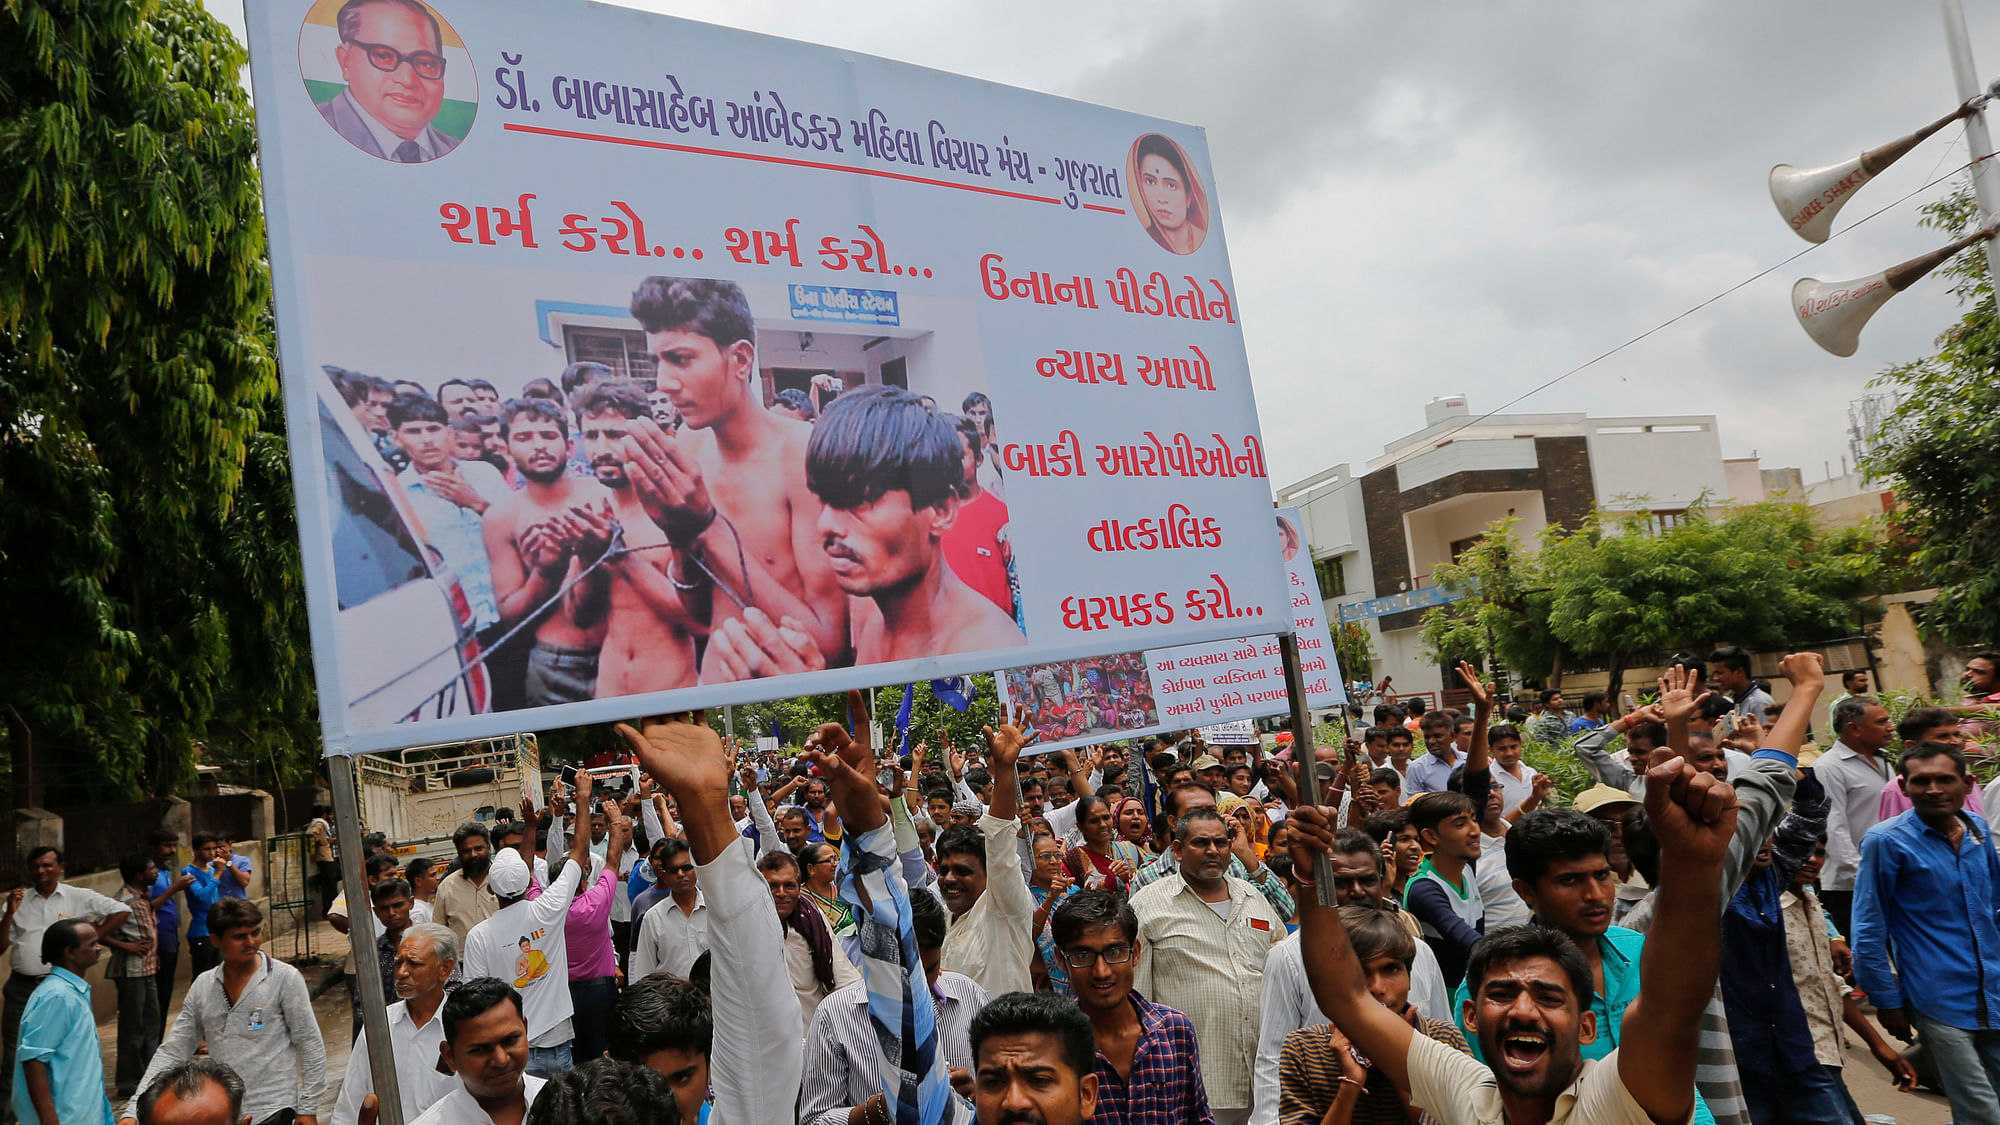 Thousands of dalits came out to protest on 31 July (Photo: AP)